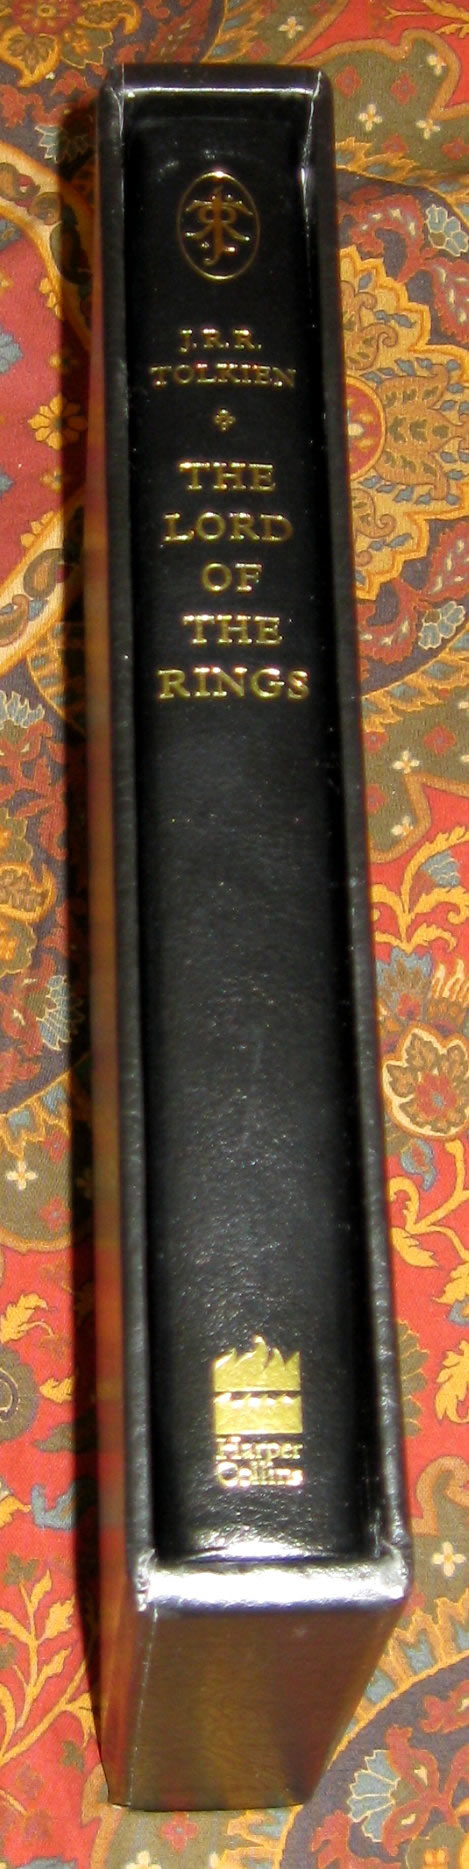 The Lord of the Rings, Harper Collins Limited Edition 2001 with publishers slipcase